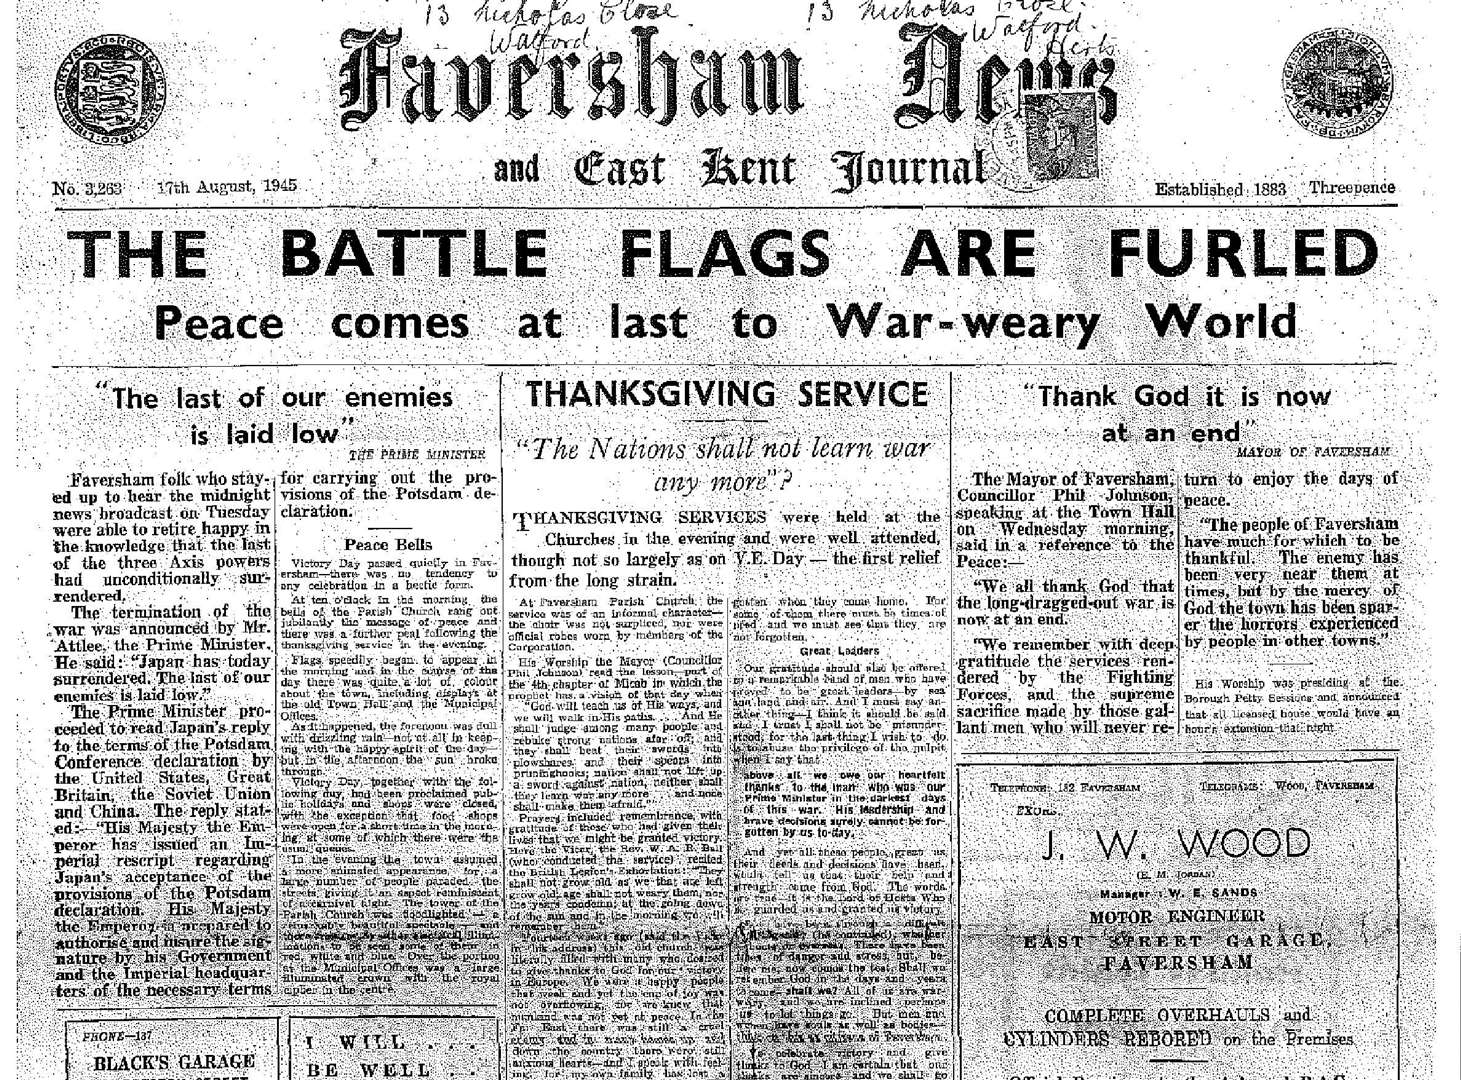 The front page of the Faversham News recording the end of the Second World War, 73 years ago